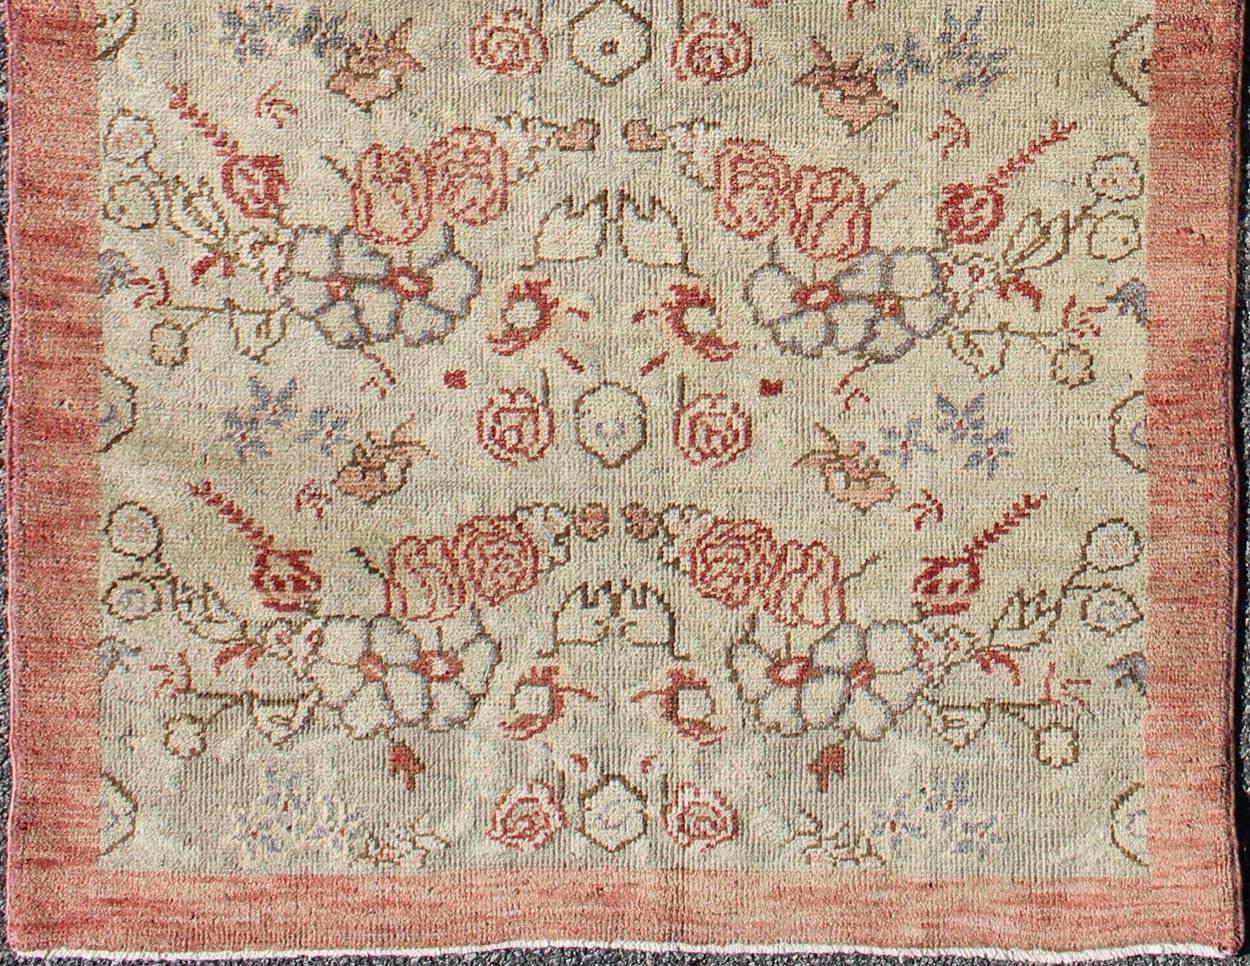 Turkish Oushak vintage rug with all-over floral design in cream and salmon pink, rug isa-1, country of origin / type: Turkey / Oushak, circa mid-20th century

The design of this beautiful vintage Oushak rug from mid-20th century Turkey is enhanced